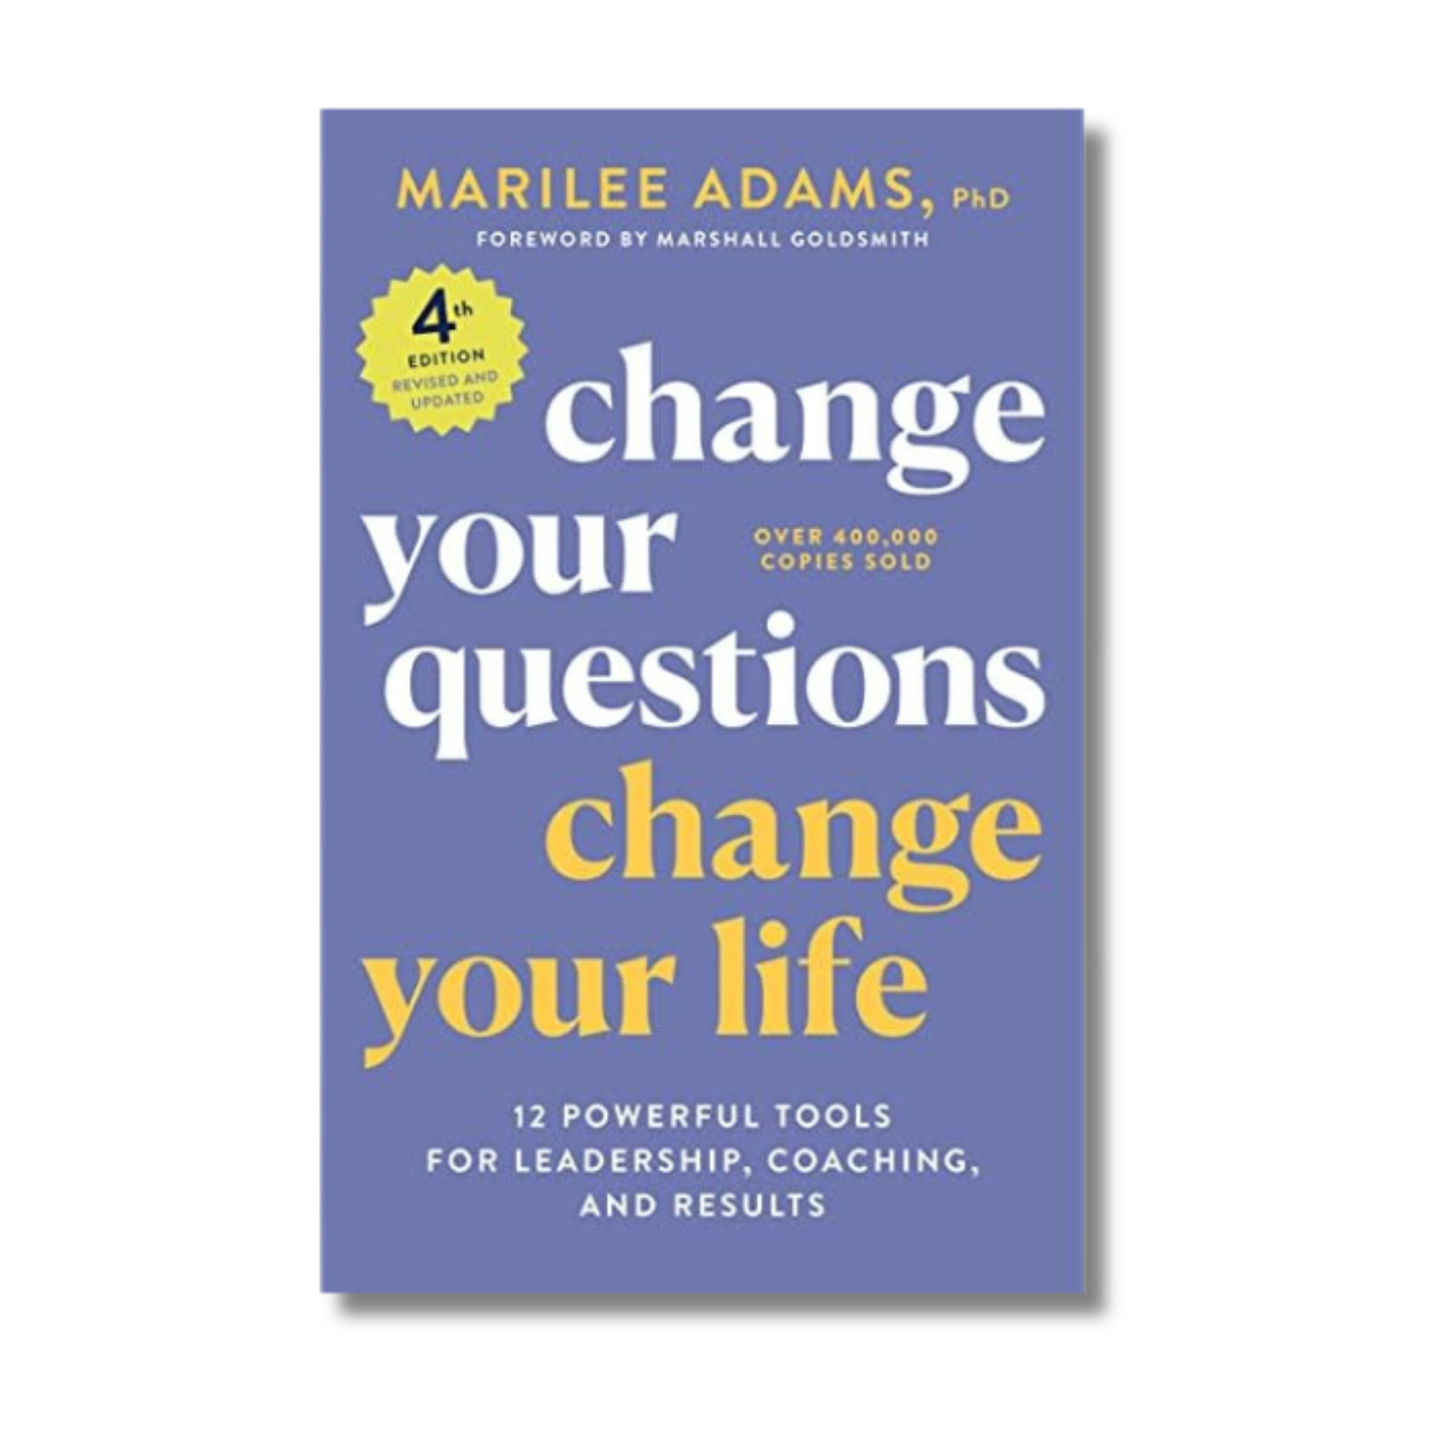 Change Your Questions Change Your Life by Marilee Adams PhD